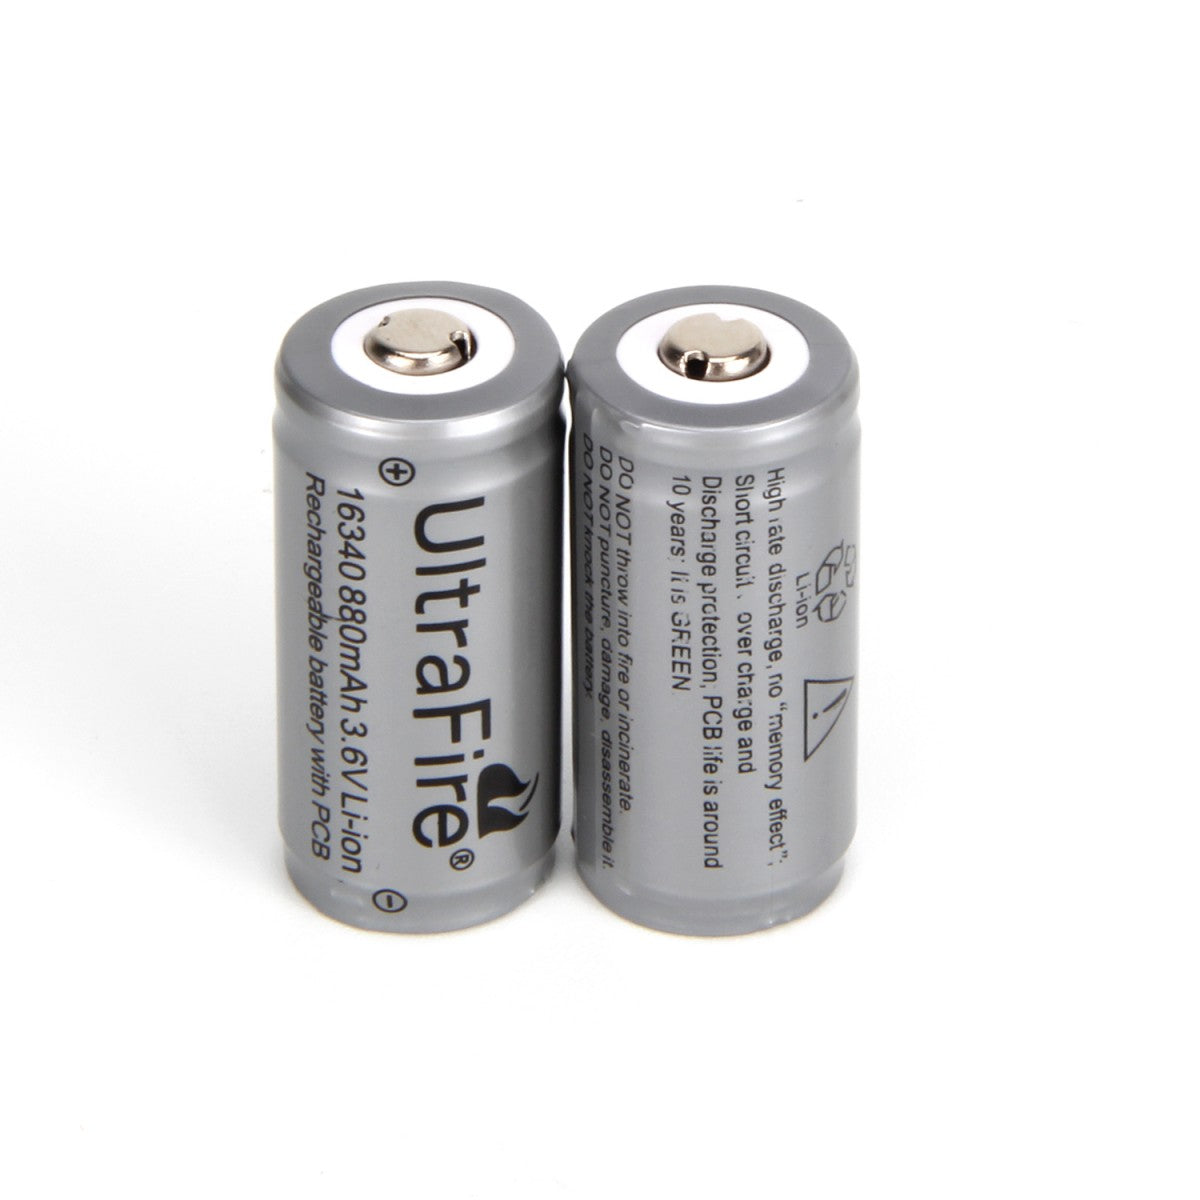 UltraFire 880mAh 3.6V 16340 Rechargeable Lithium Battery With Protection Board (2PCS)